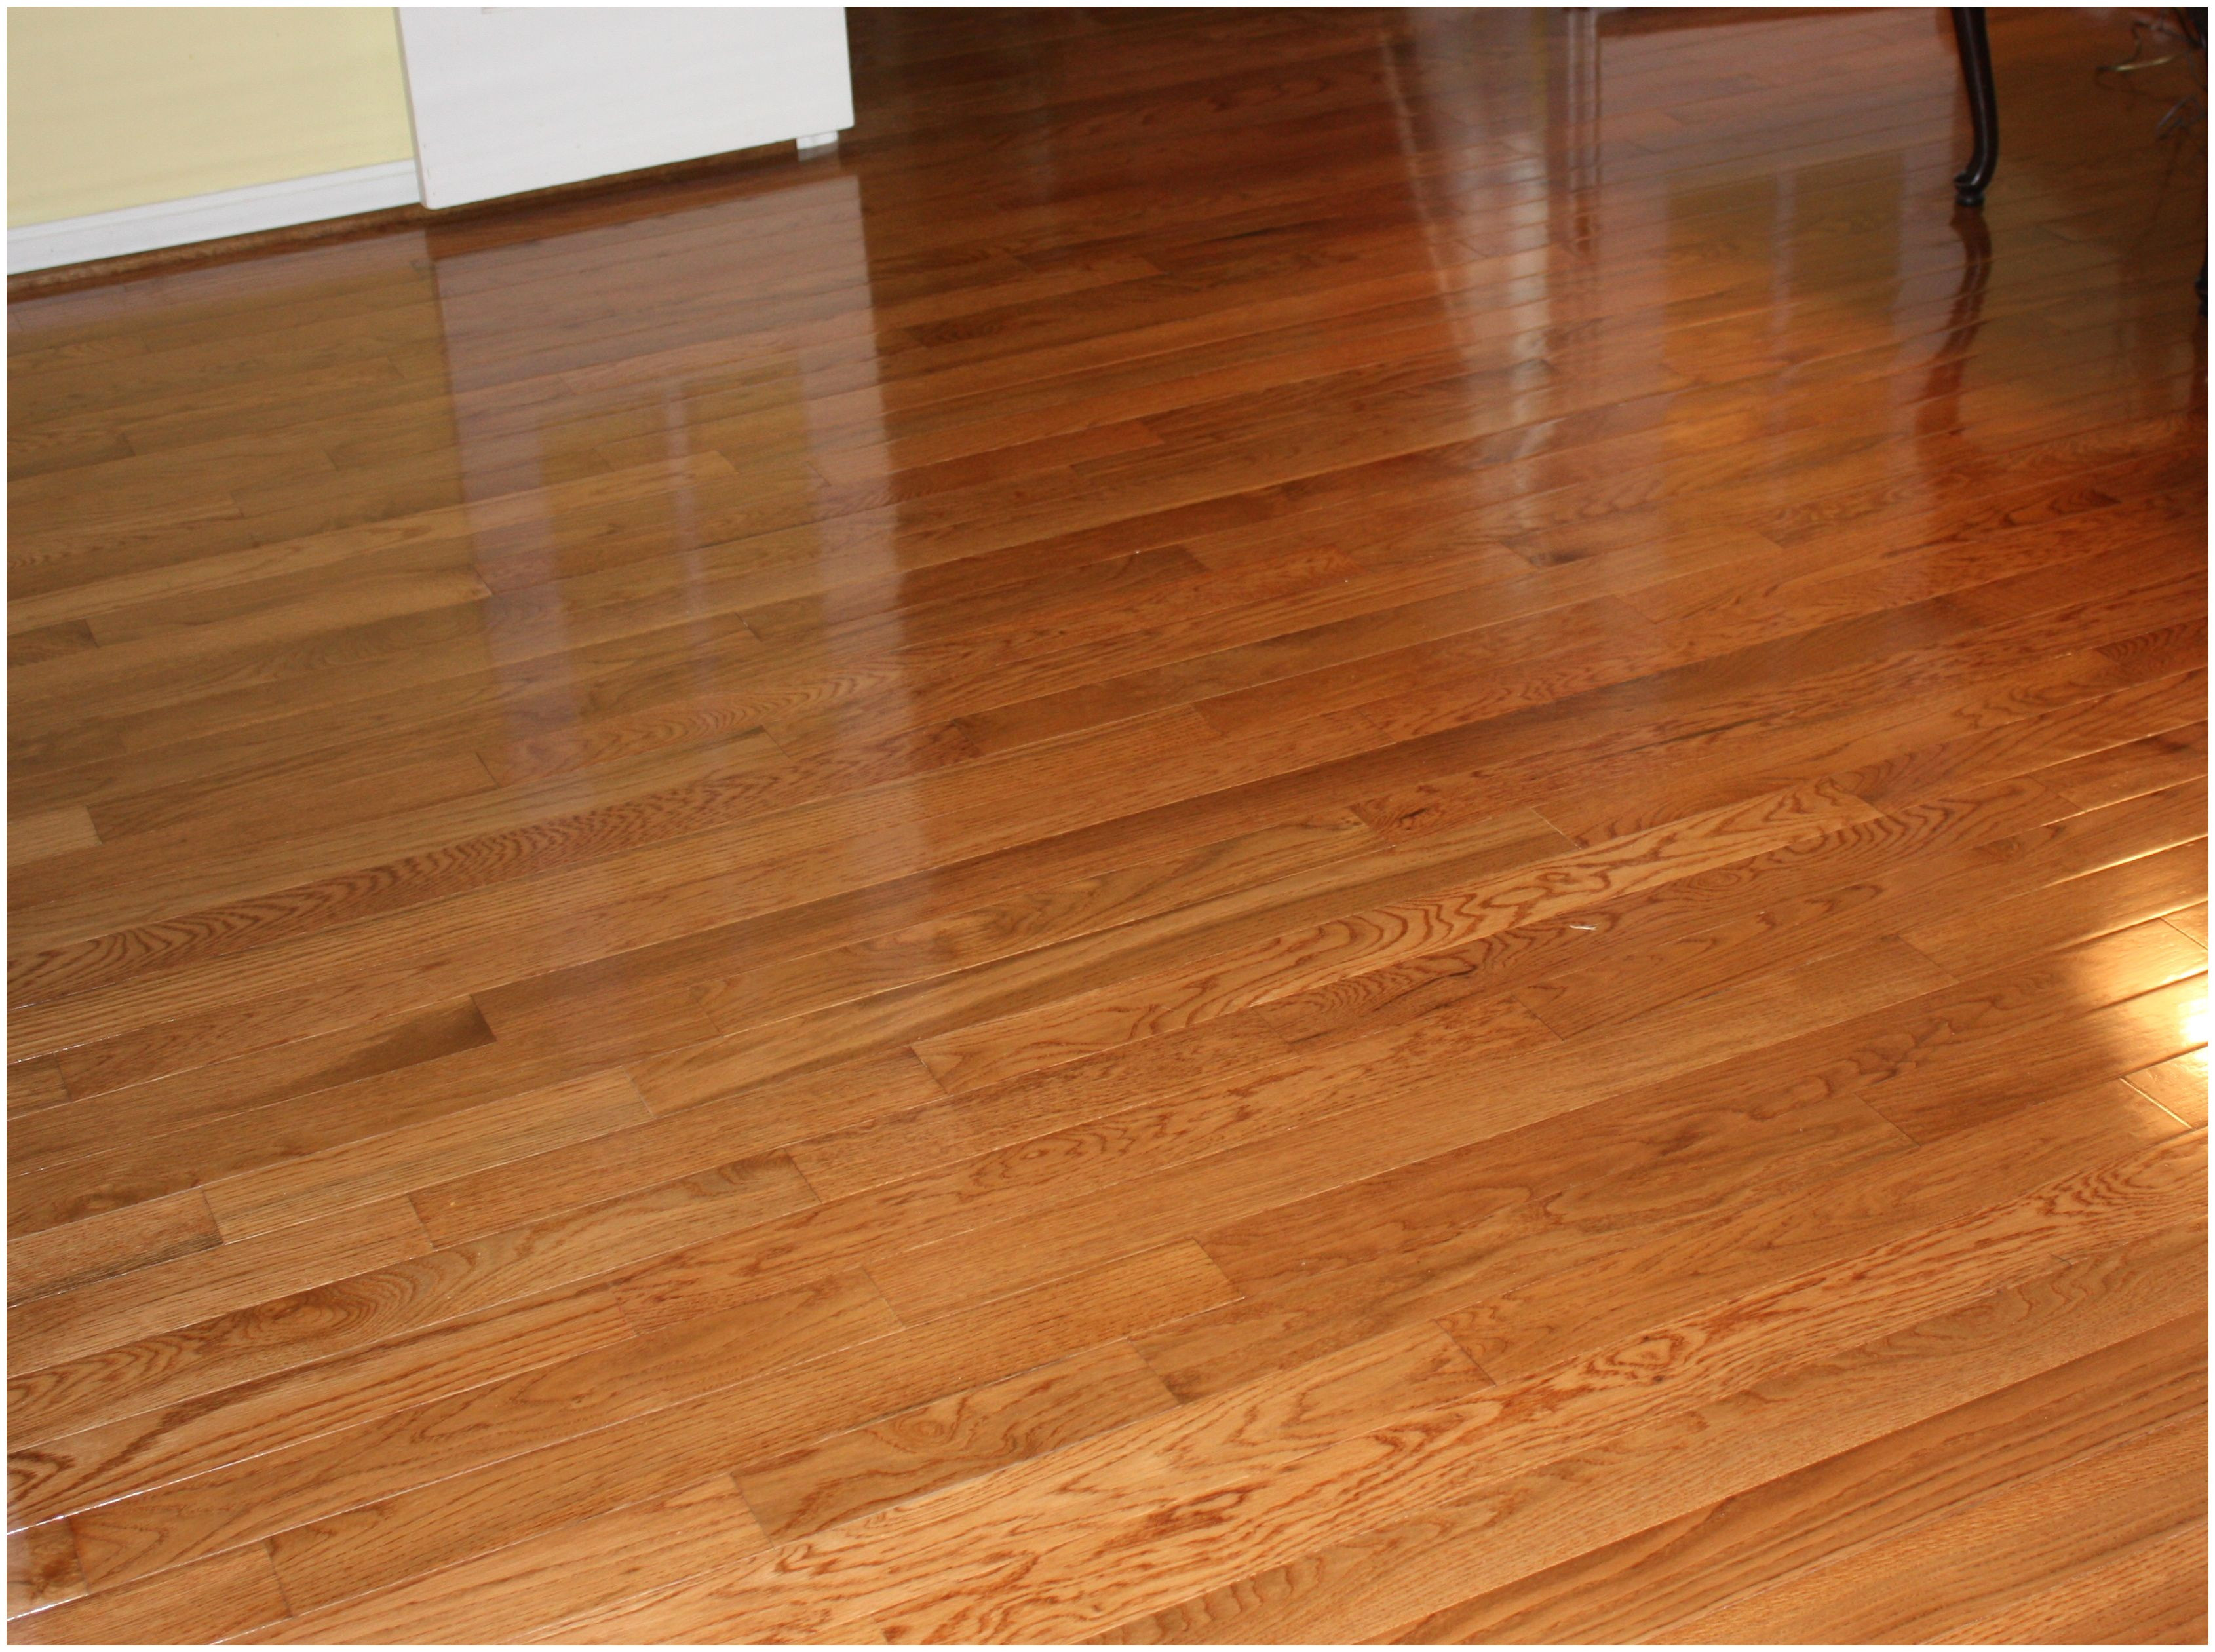 20 Recommended How to Clean Engineered Hardwood Floors after Installation 2024 free download how to clean engineered hardwood floors after installation of 18 new engineered hardwood flooring pros and cons photos dizpos com with engineered hardwood flooring pros and cons awesome hard